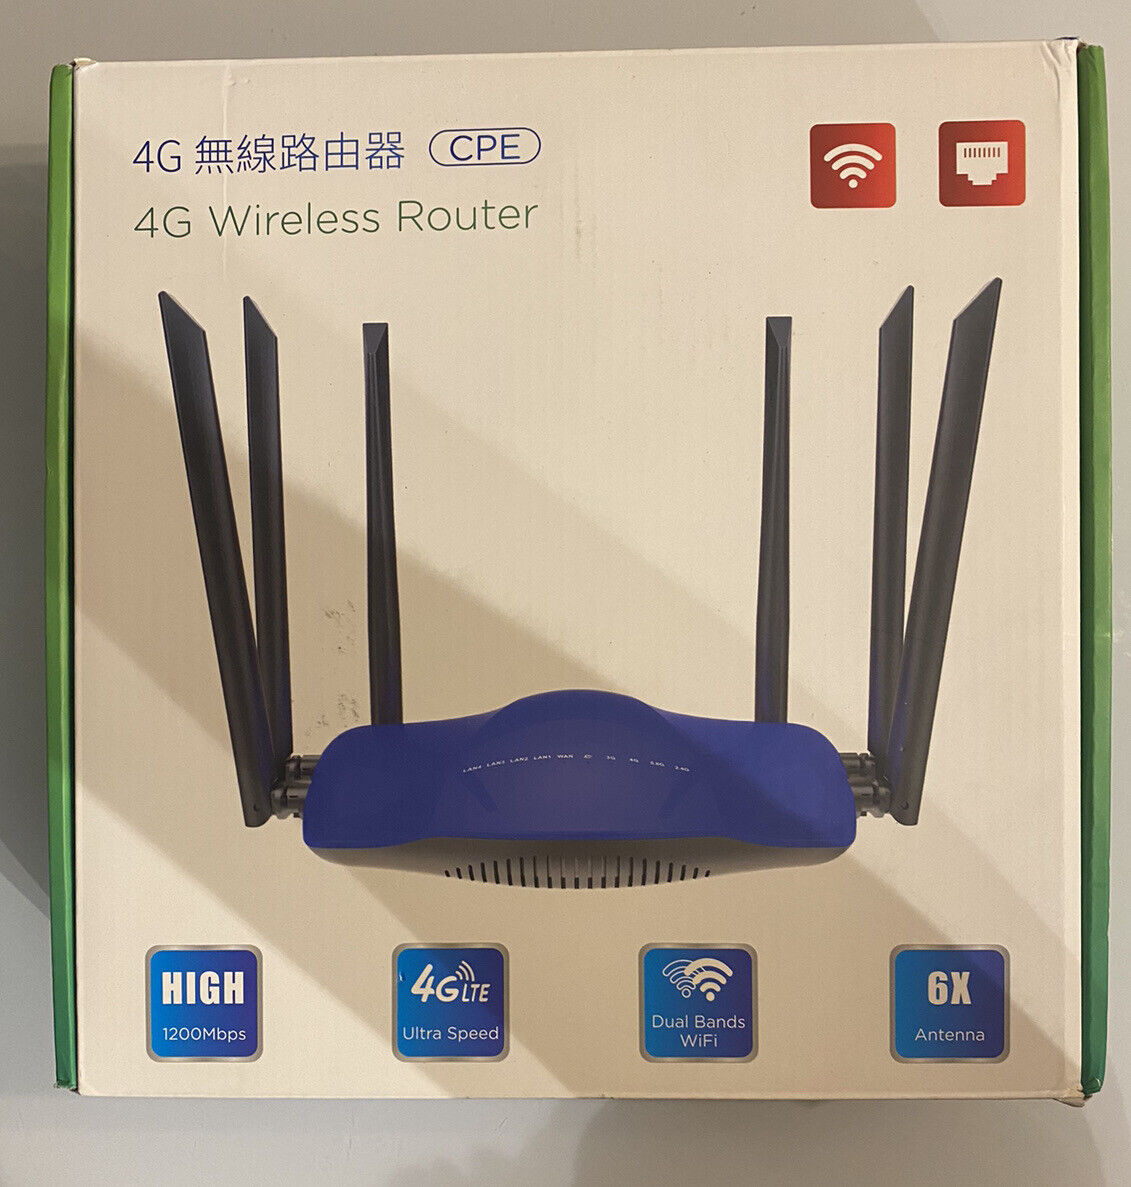 Dionlink 1200Mbps AC1200 Dual Band WIFI 4G Router with 6 Antennas